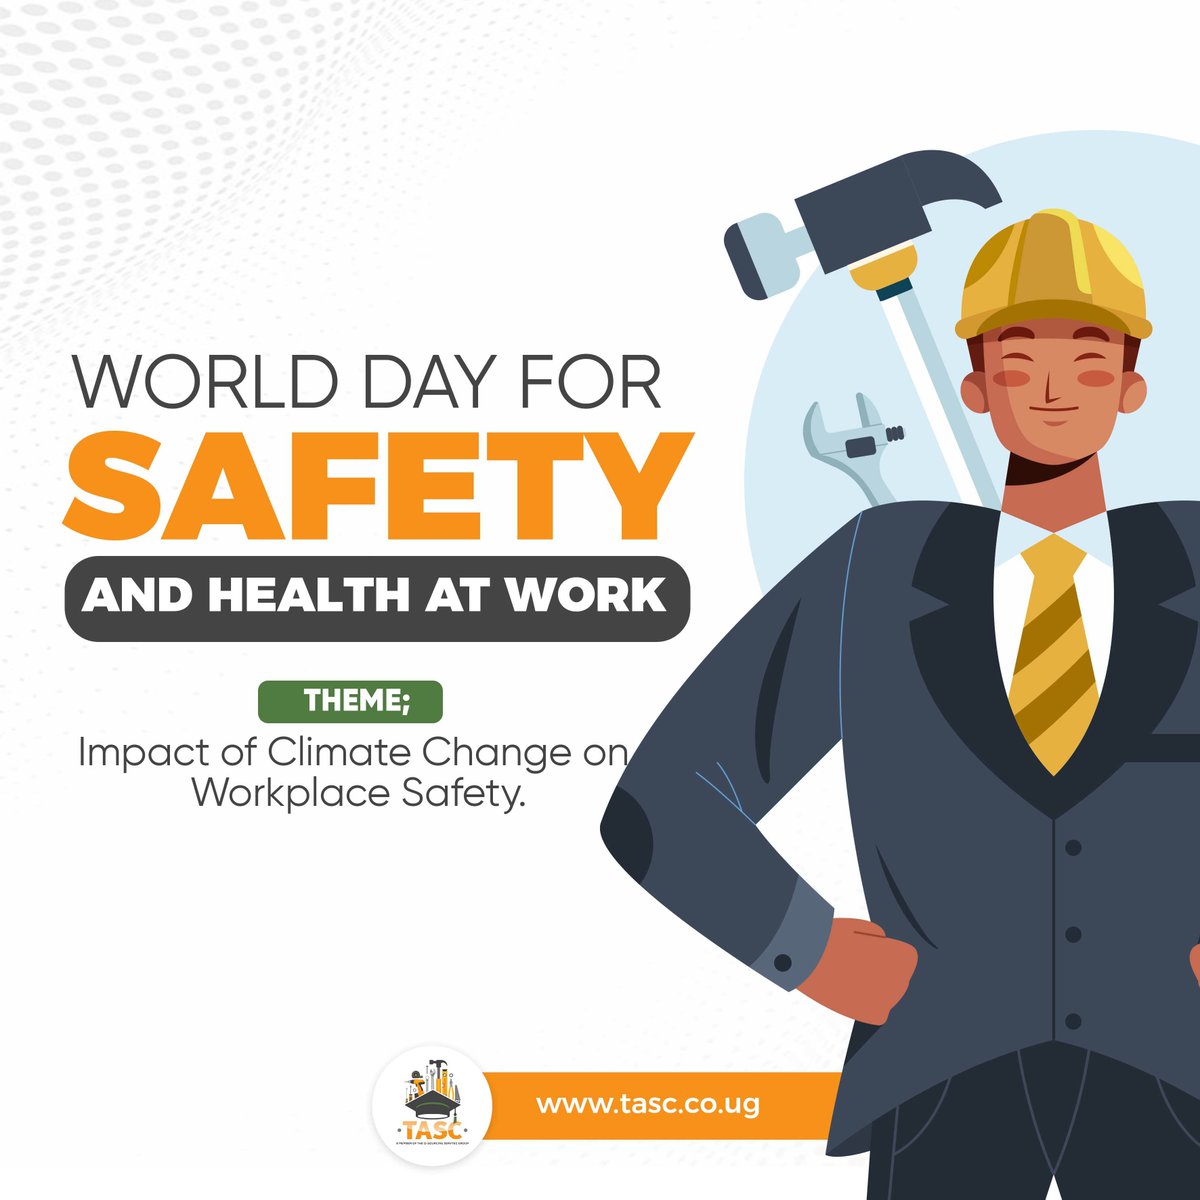 On this World Day for Safety and Health at Work, let's prioritize resilience in the face of climate change. Our workplaces must adapt to mitigate risks and ensure a safer environment for all.
#WorldDayForSafetyandHealthAtWork